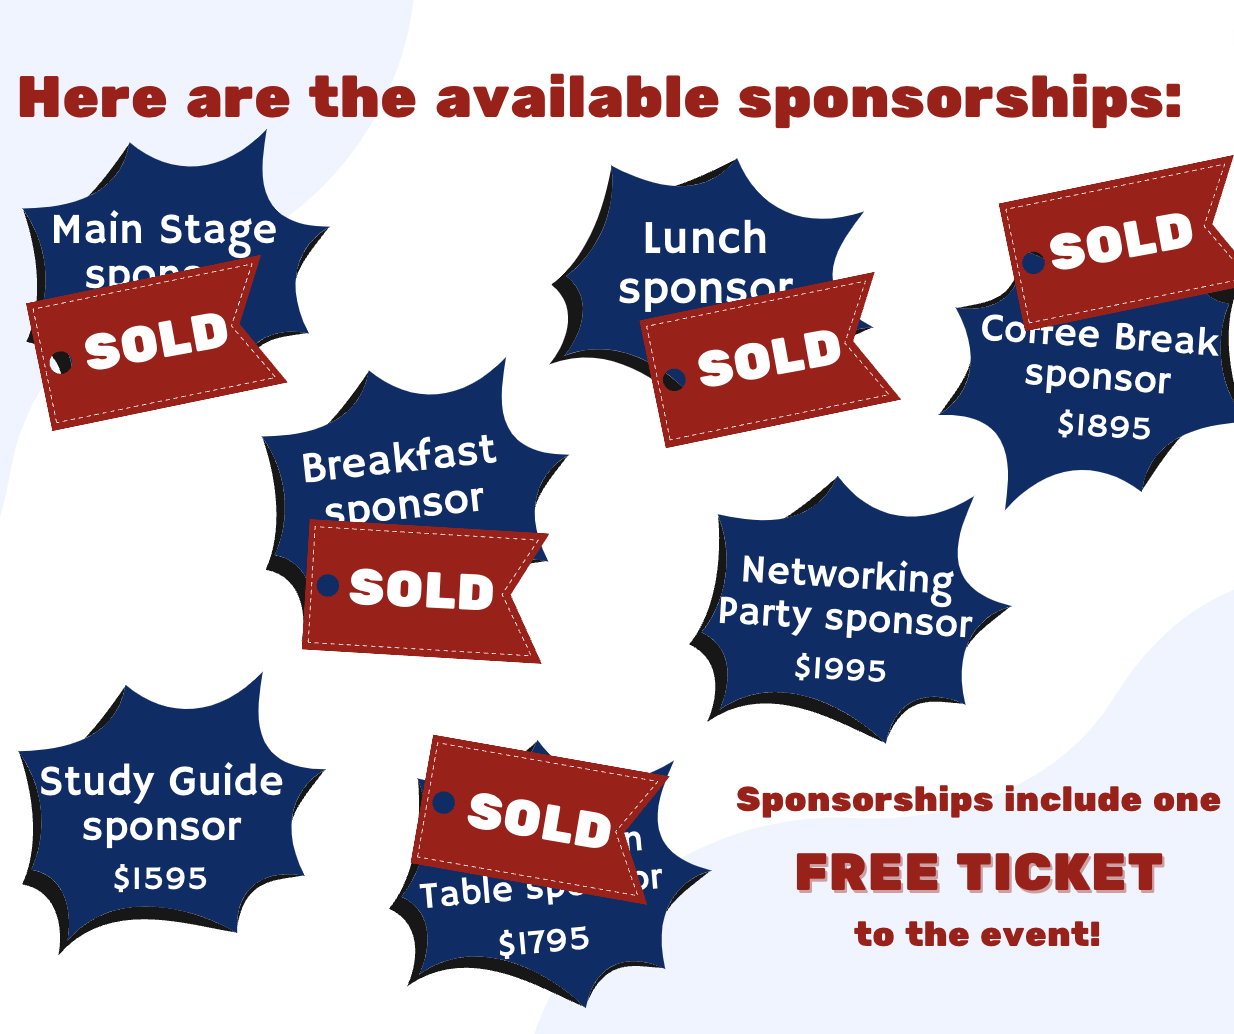 Networking party sponsor for $1995 and study guide sponsor for $1595 are the only sponsorships still available. All sponsorships include a free ticket to the event.